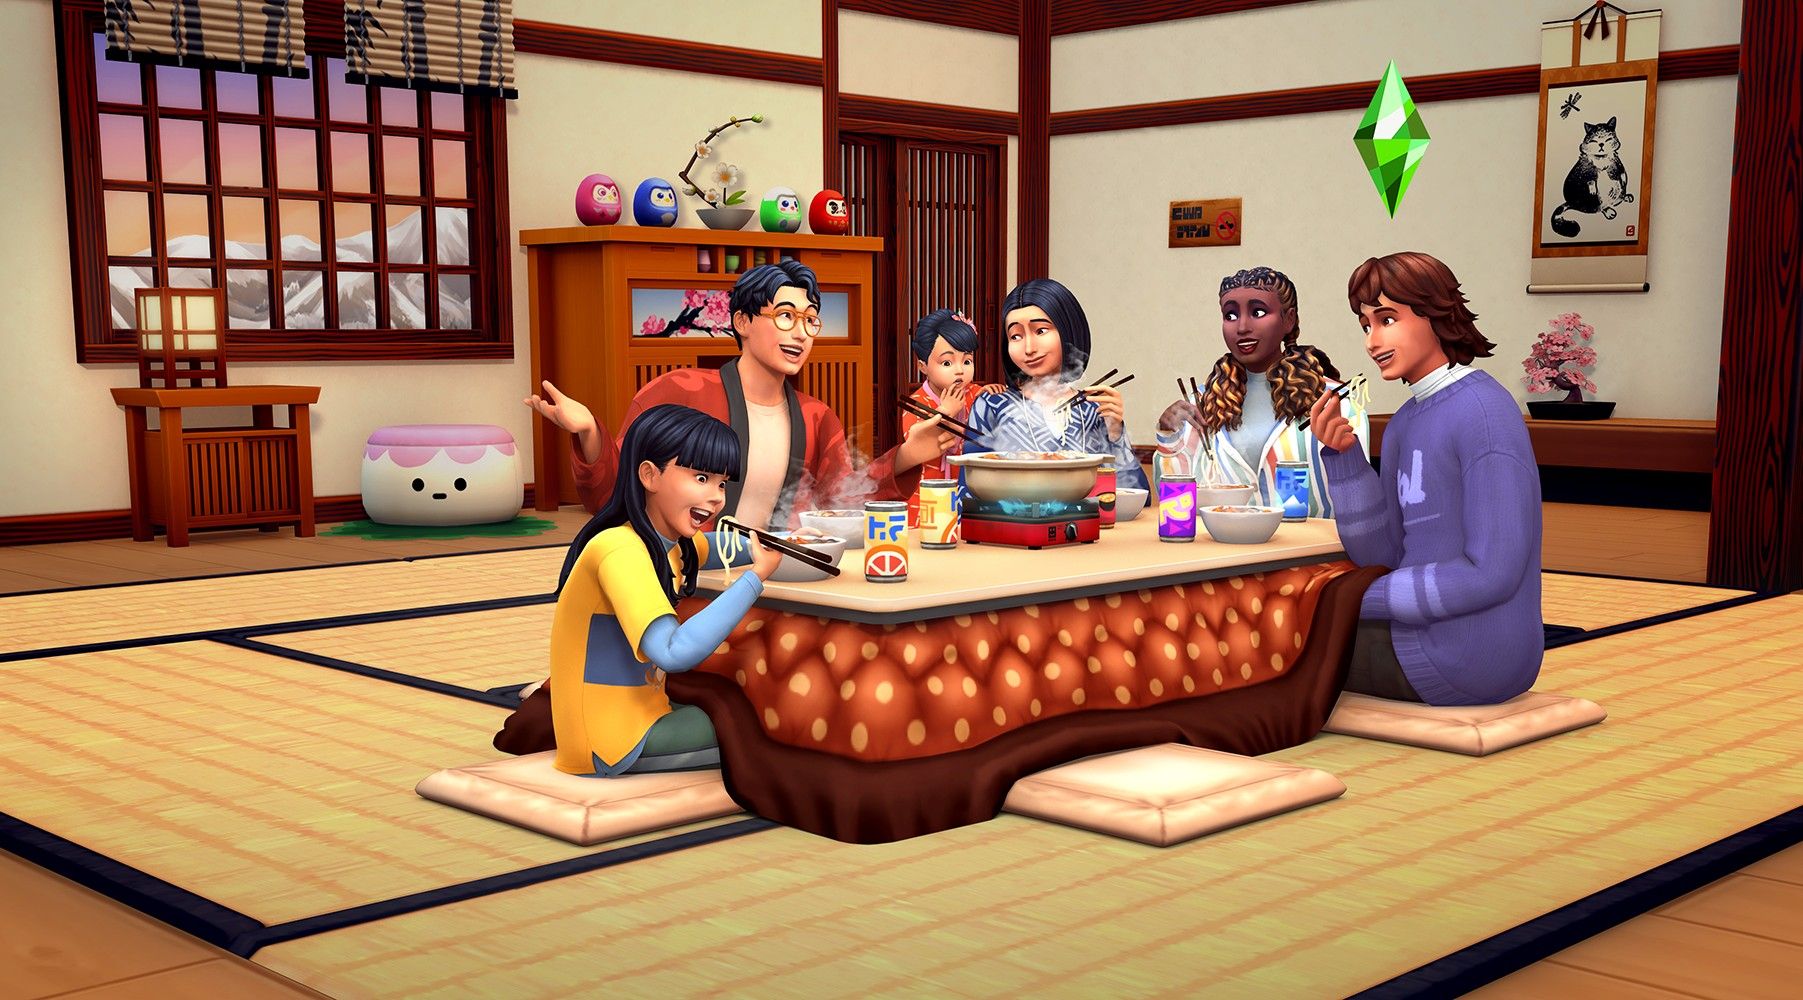 A family gathers around the table and eats a Hot Pot meal in The Sims 4: Snowy Escape